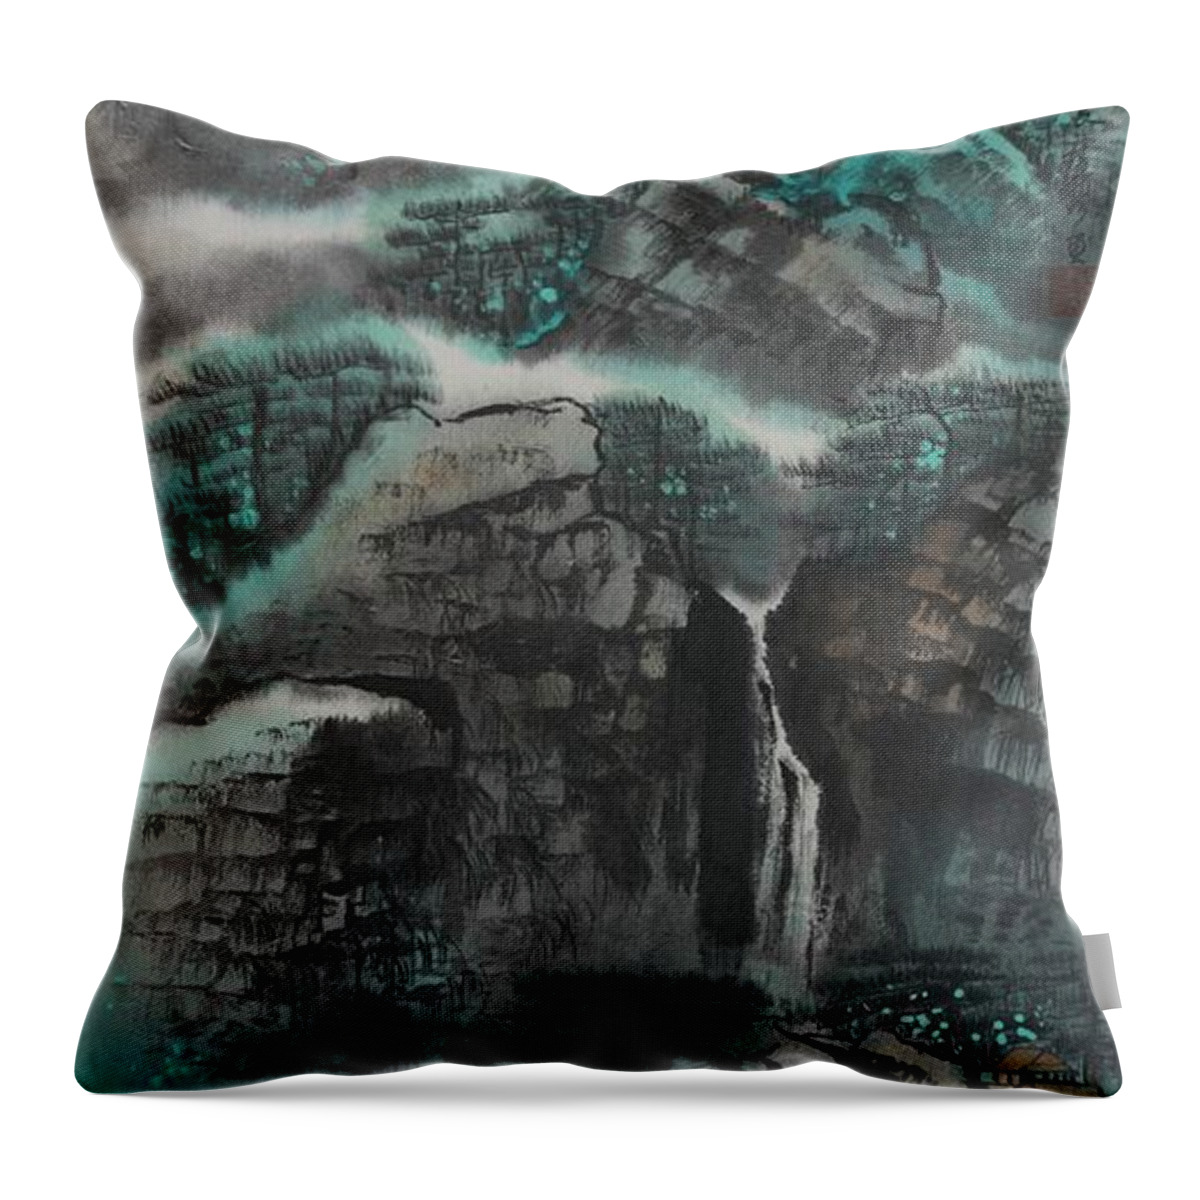 Chinese Watercolor Throw Pillow featuring the painting The Four Seasons Version 1 - Spring by Jenny Sanders